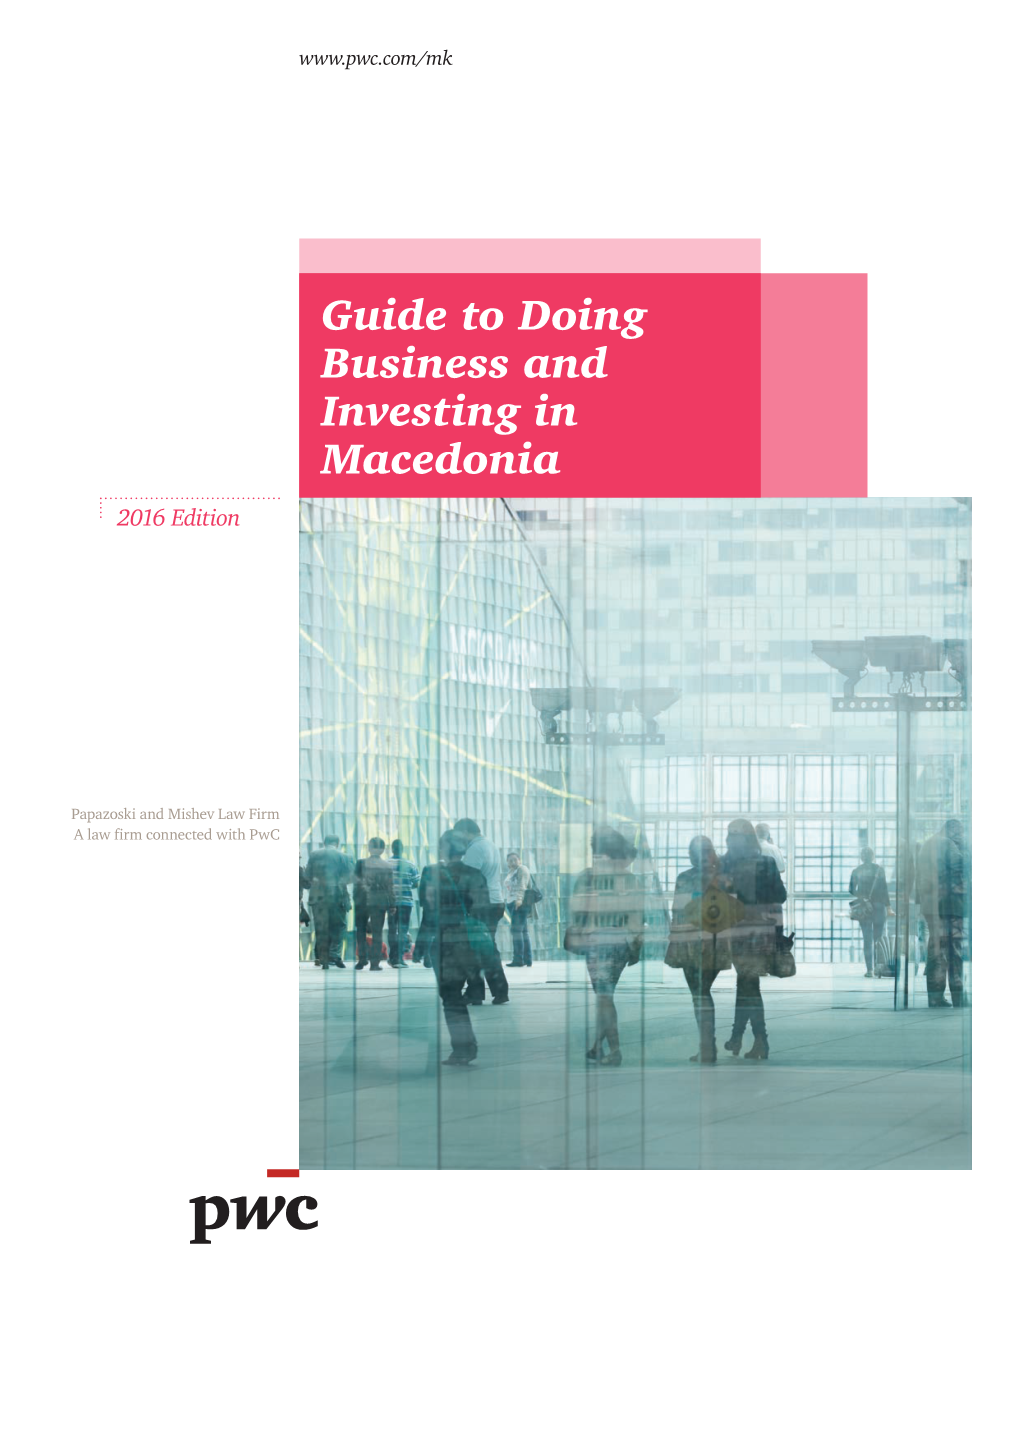 Guide to Doing Business and Investing in Macedonia 2016 Edition